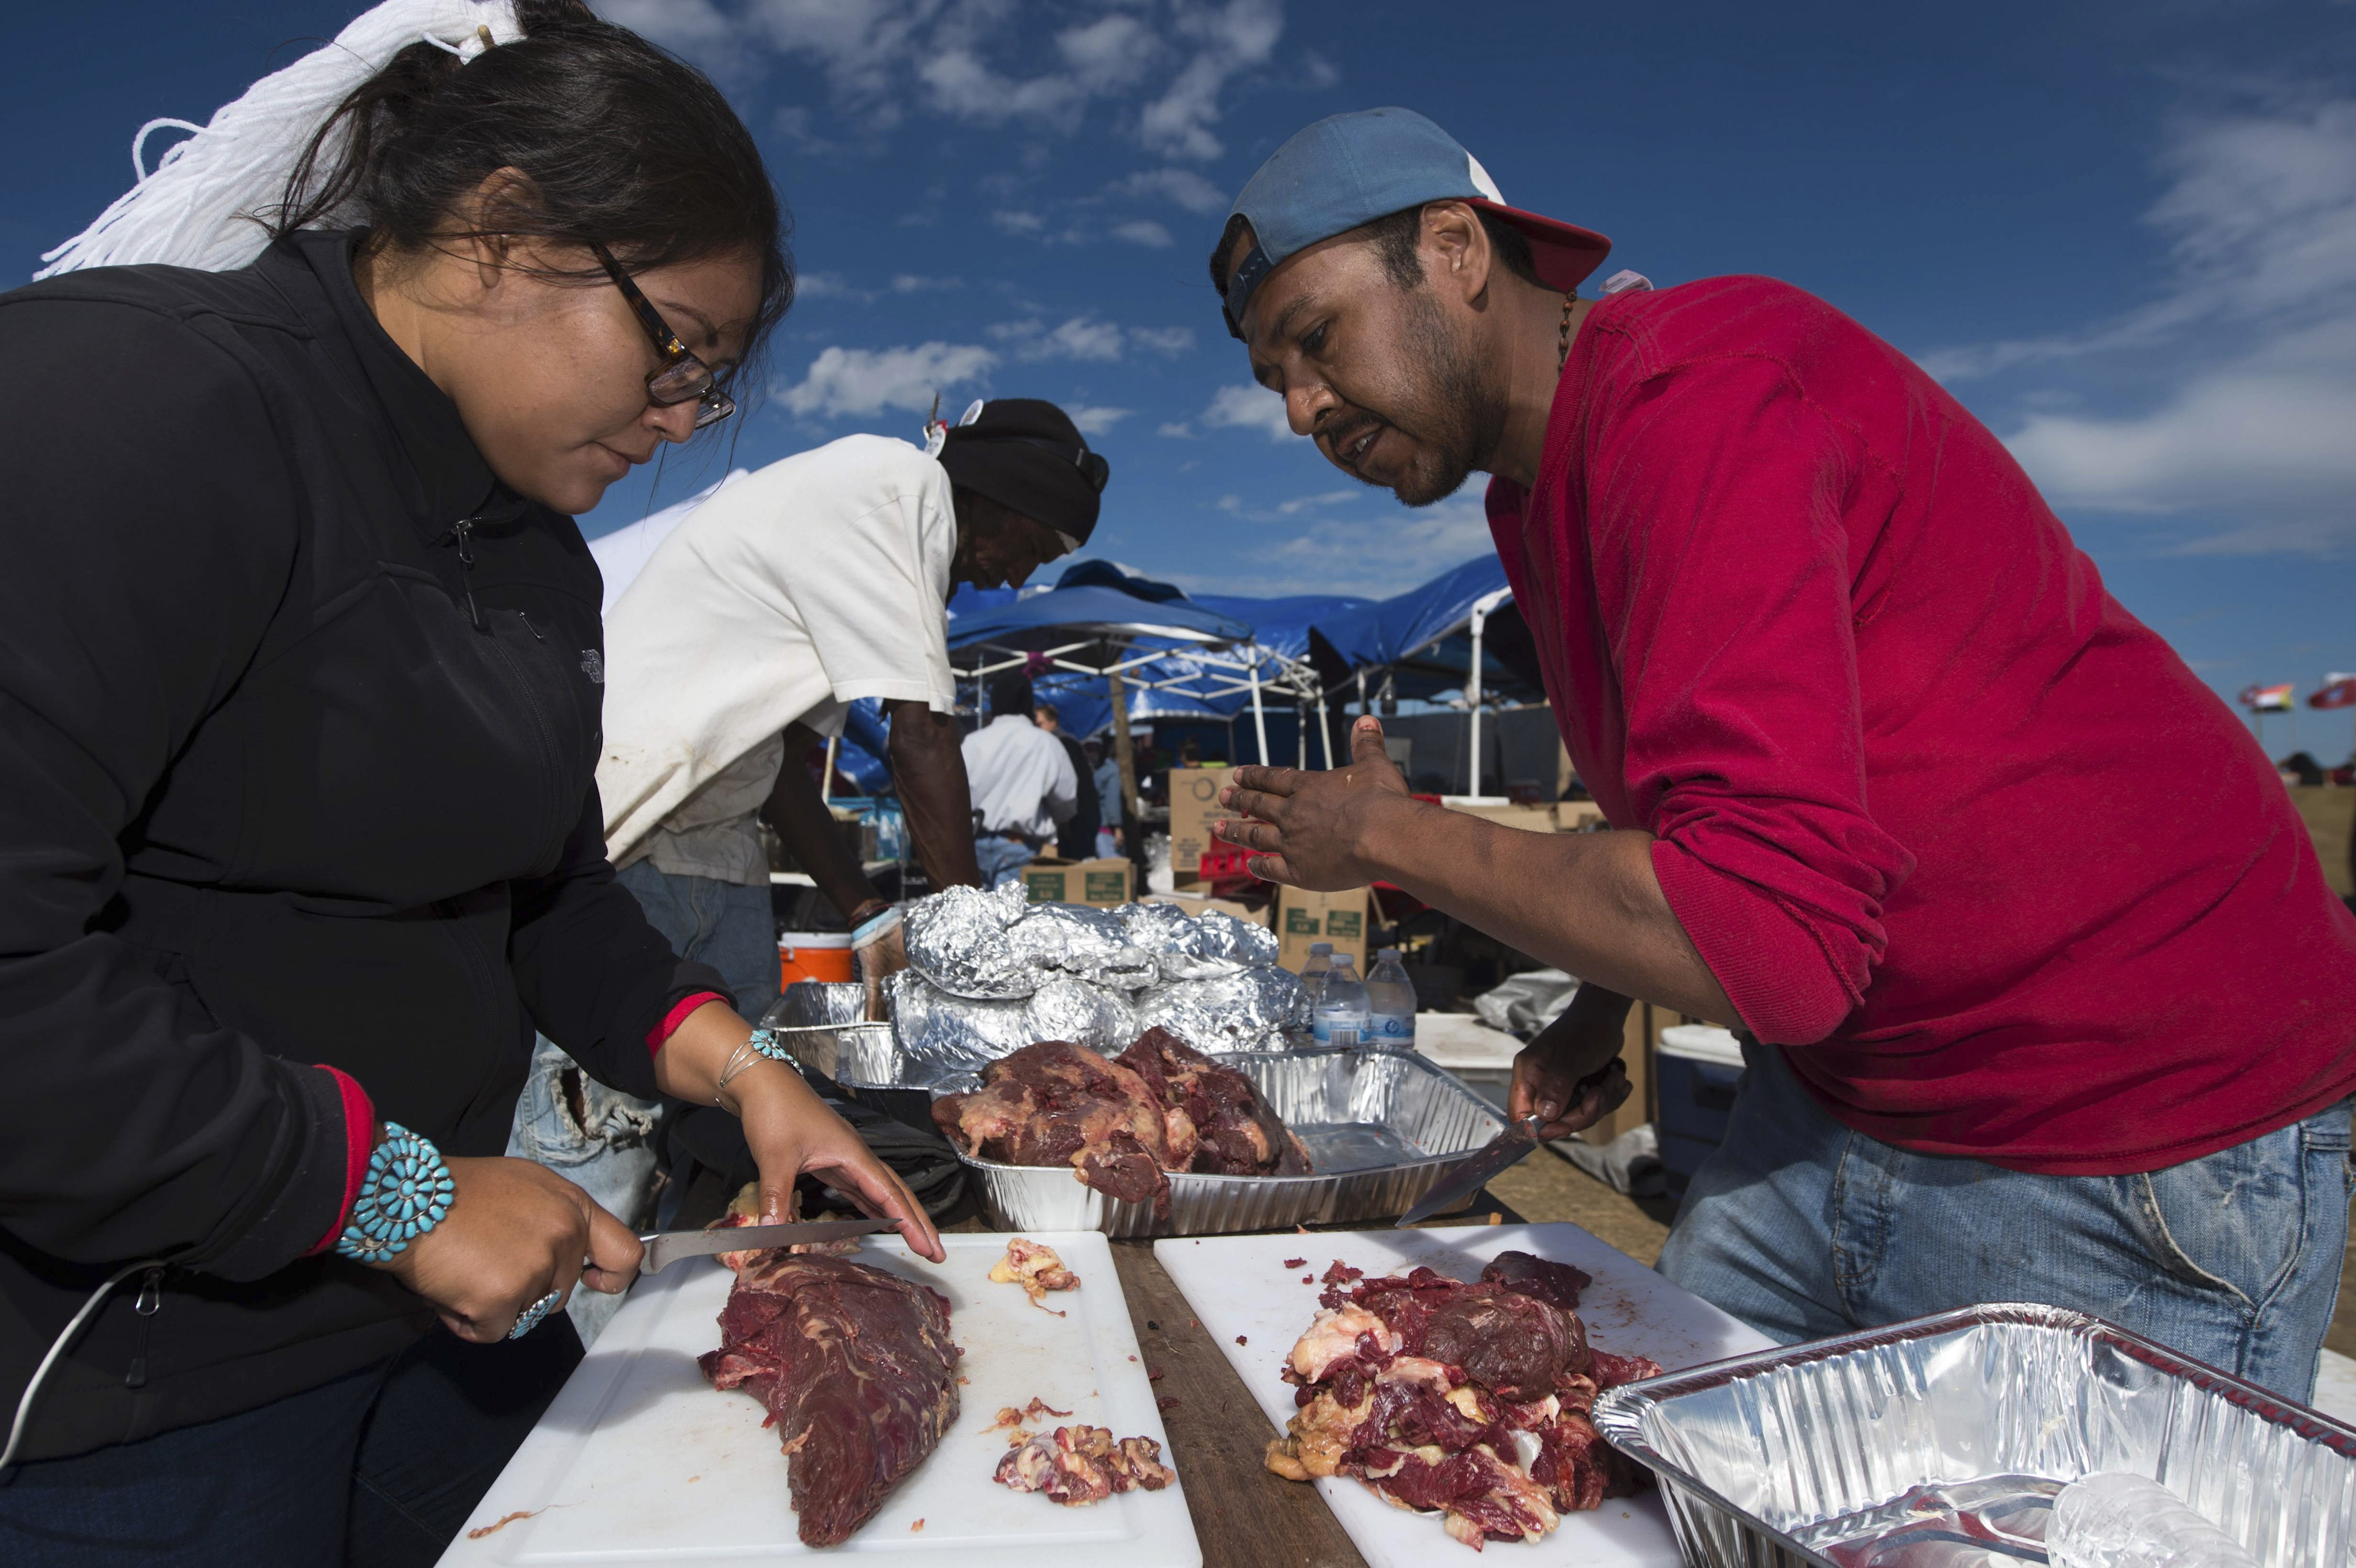 Lamar Armstrong of the Mojave Paiute, right,  instructs graduate student Tyesha Ignacio of the Najavo Nation how to prepare donated bison meat in the main kitchen area of the Standing Rock Sioux protest encampment near Cannon Ball, North Dakota ,on Sept. 3, 2016.